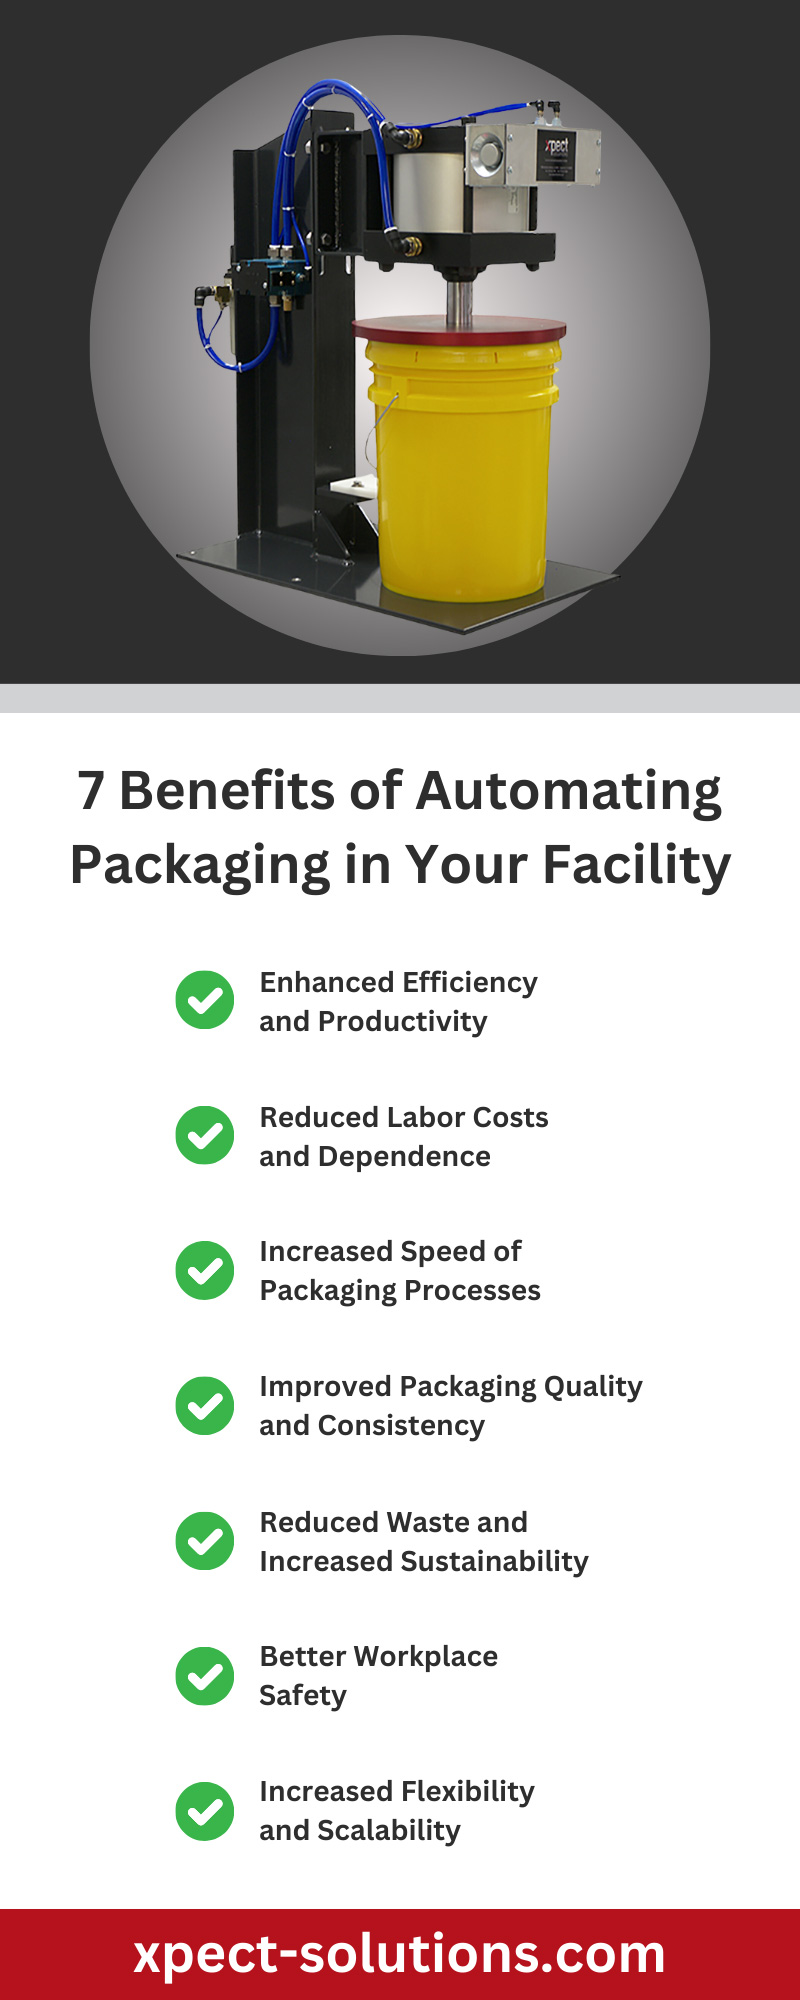 7 Benefits of Automating Packaging in Your Facility